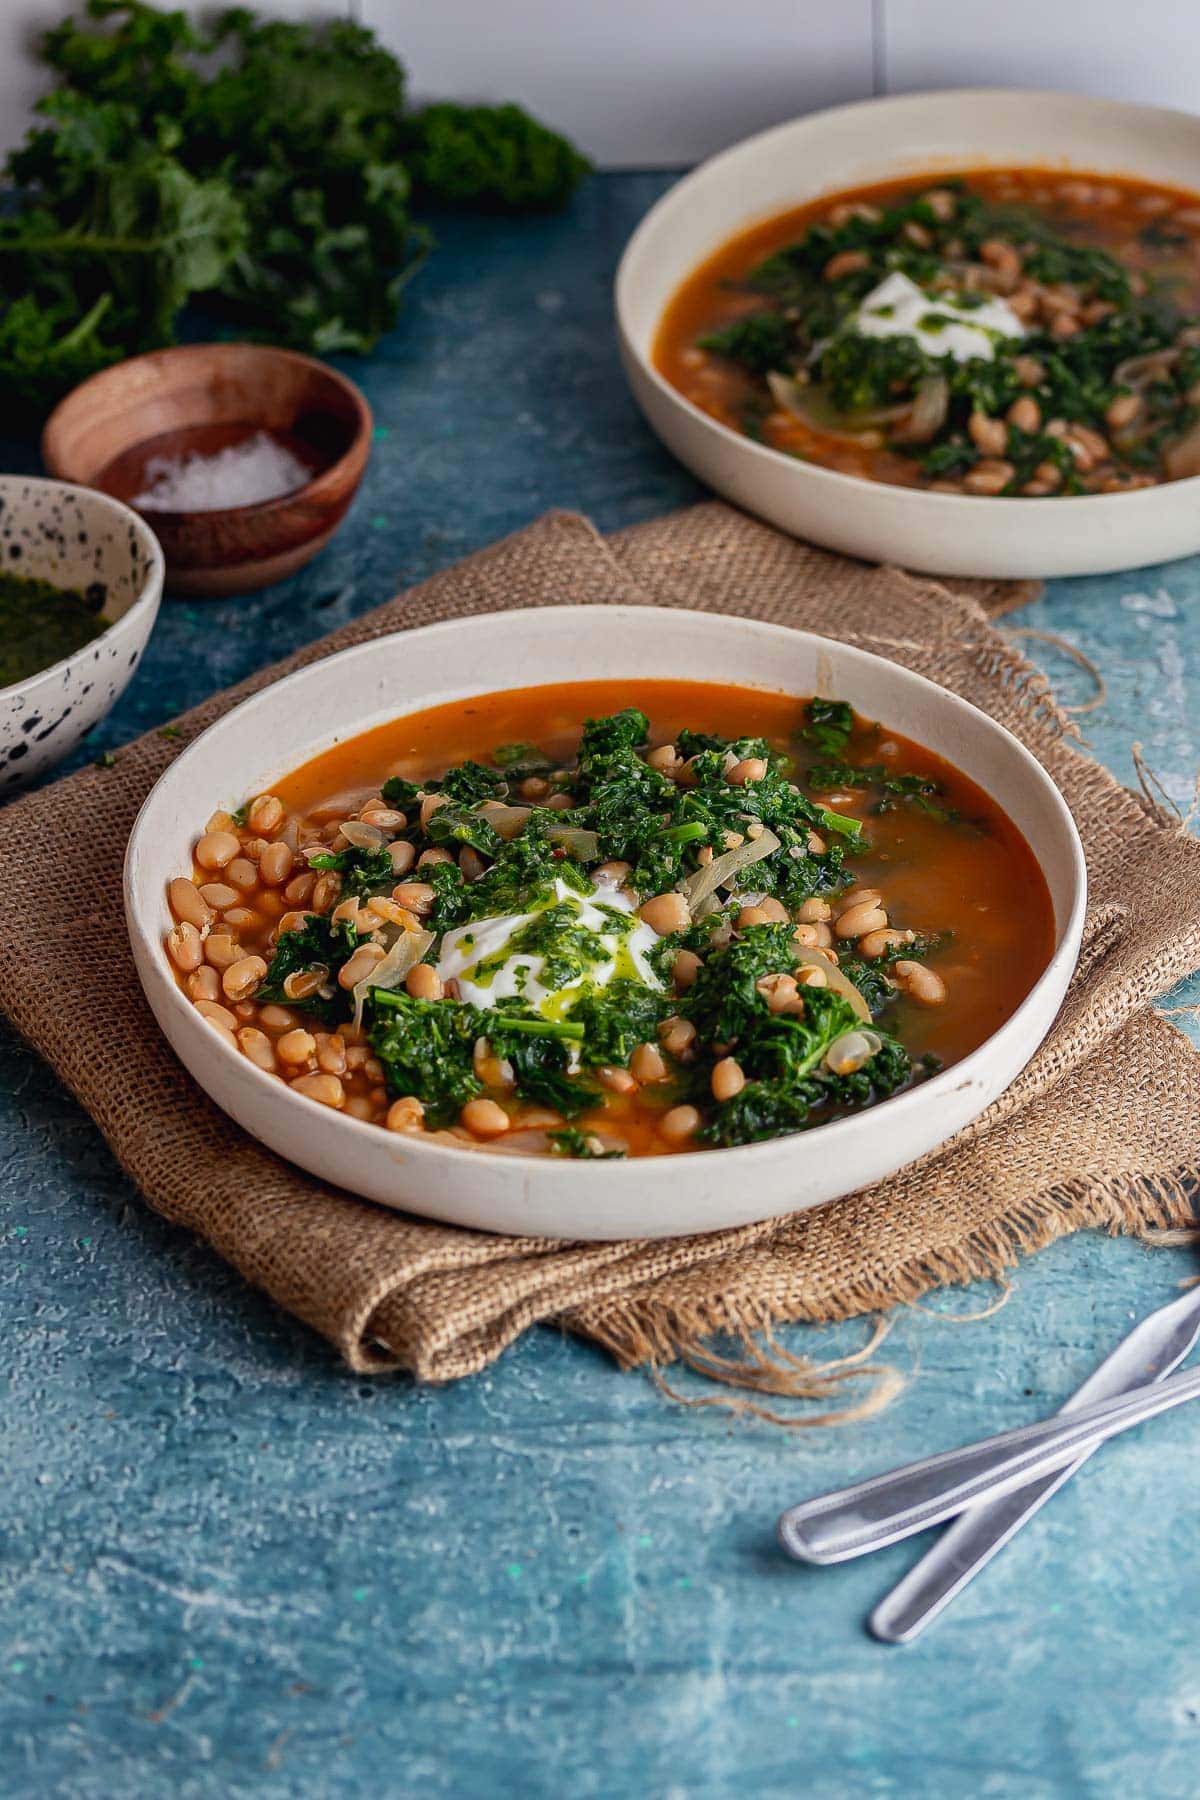 Bowl of harissa soup with beans topped with herbs on a hessian mat